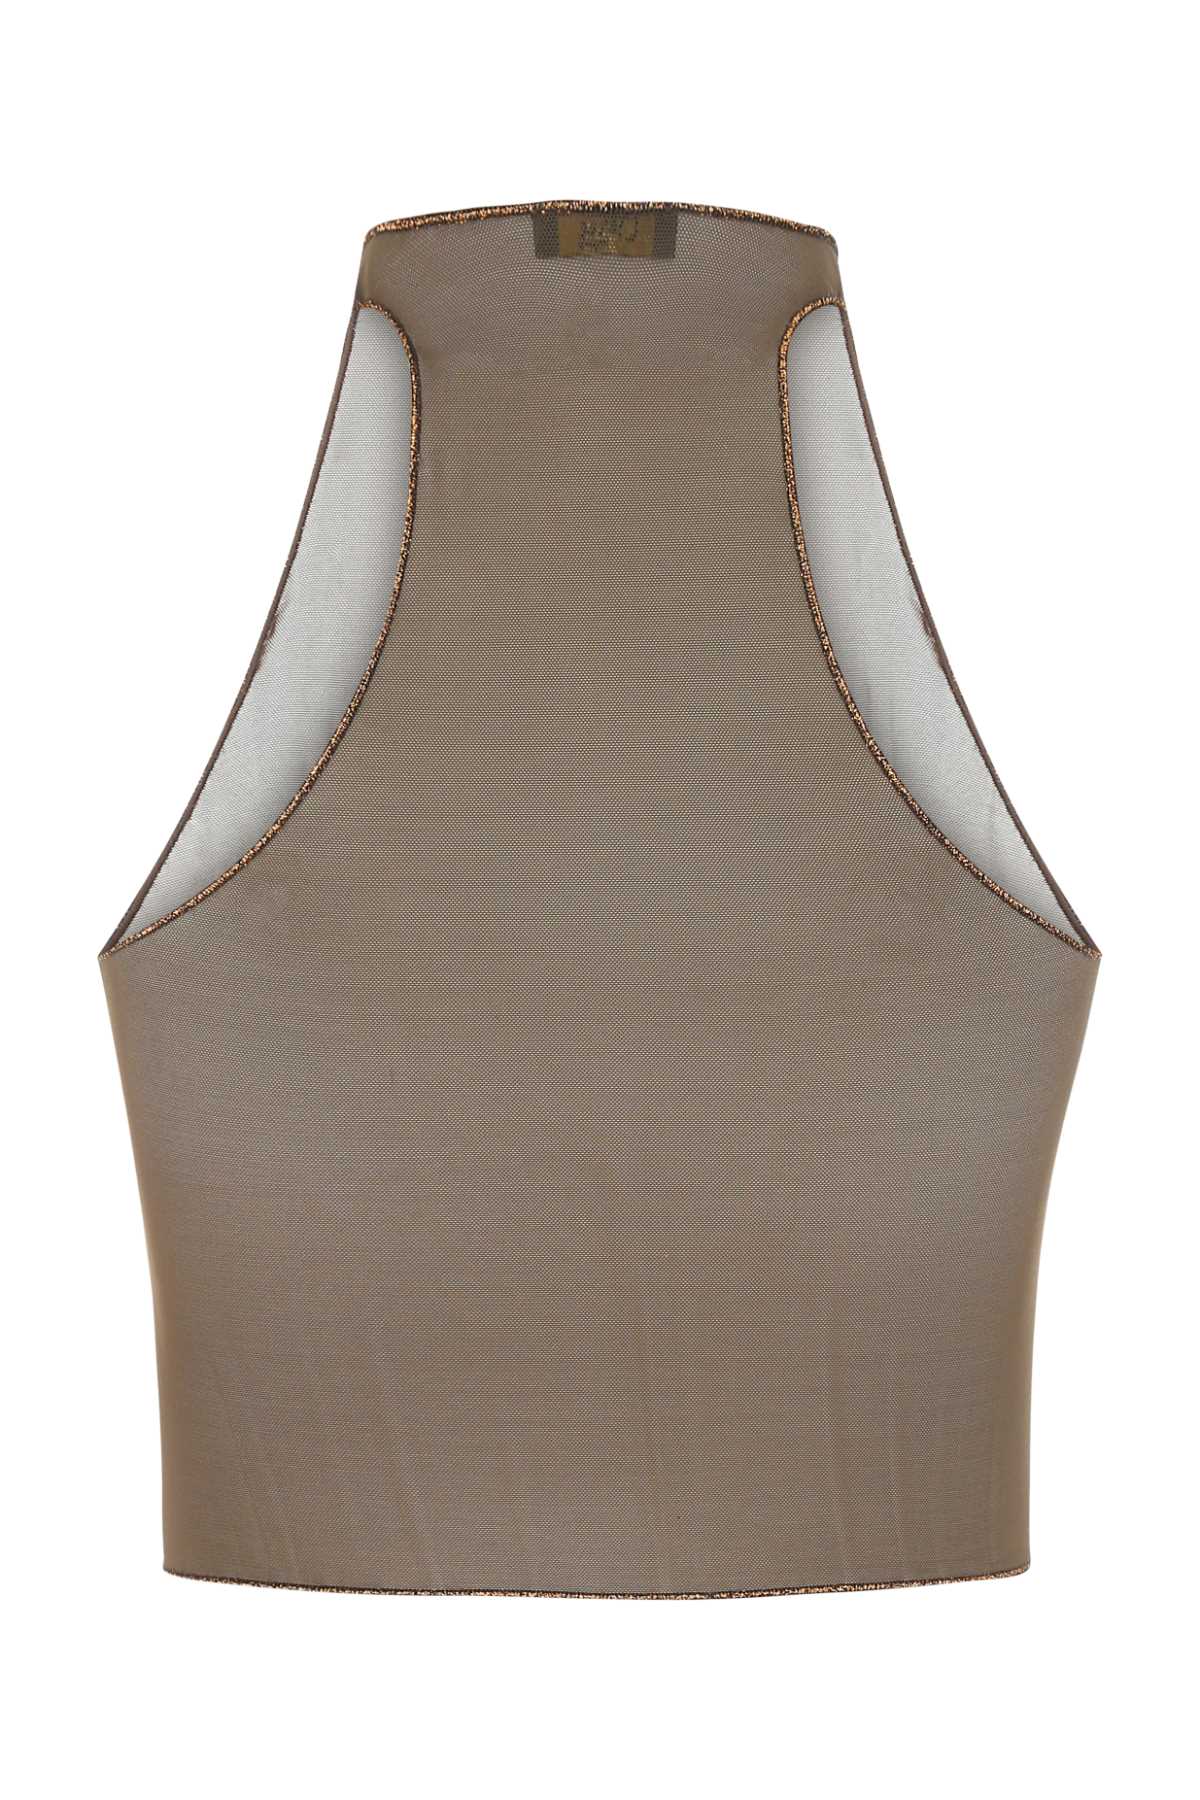 Shop Oseree Brown Stretch Mesh Top